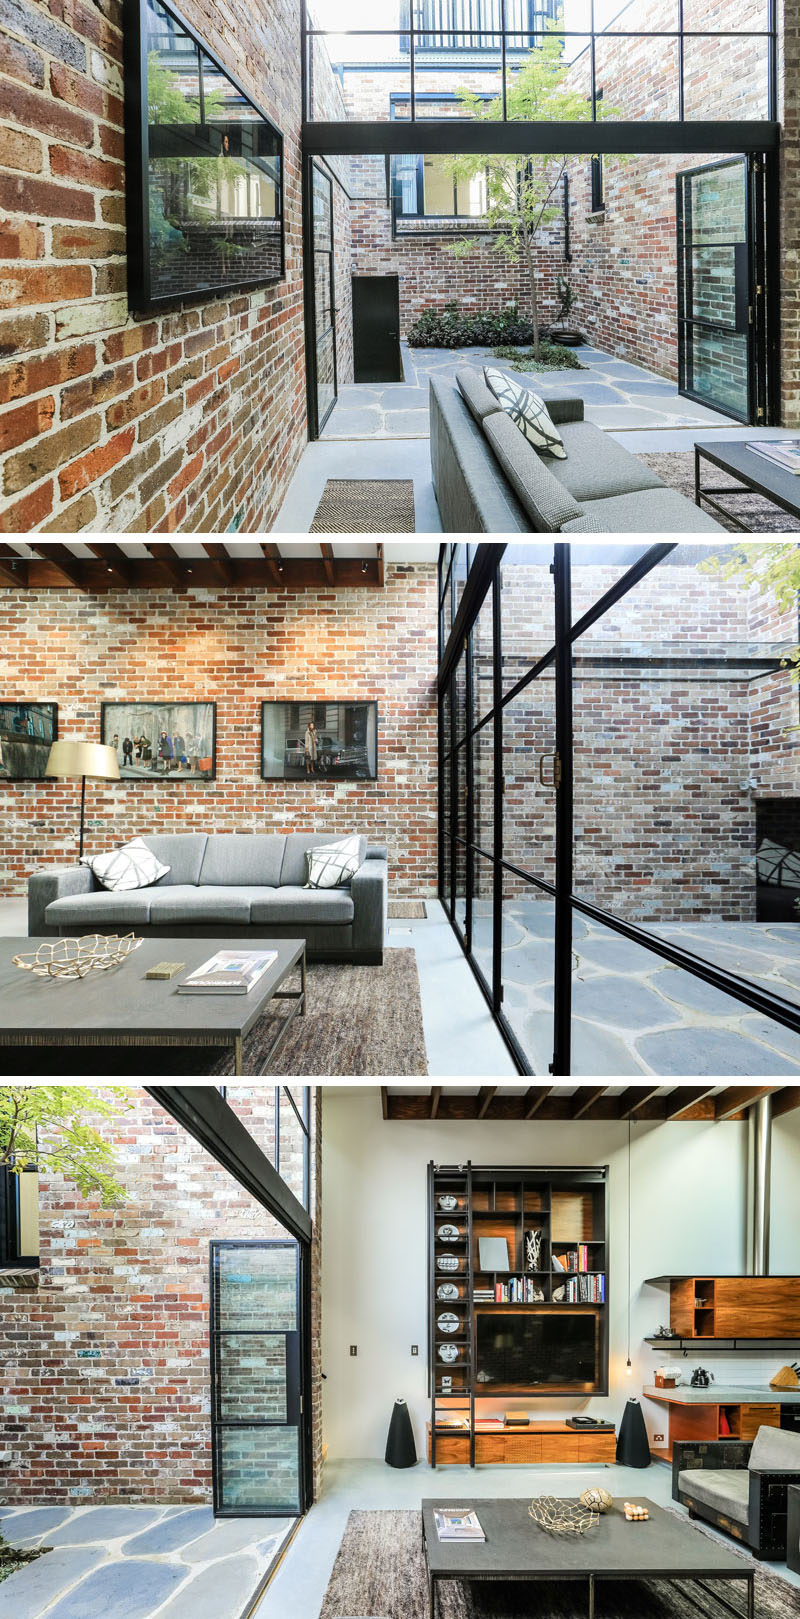 This industrial modern home in a converted commercial garage features a material palette of black steel, recycled brick, concrete and timber, while there's an abundance of natural light from the interior courtyard that fills the living, dining and kitchen area.